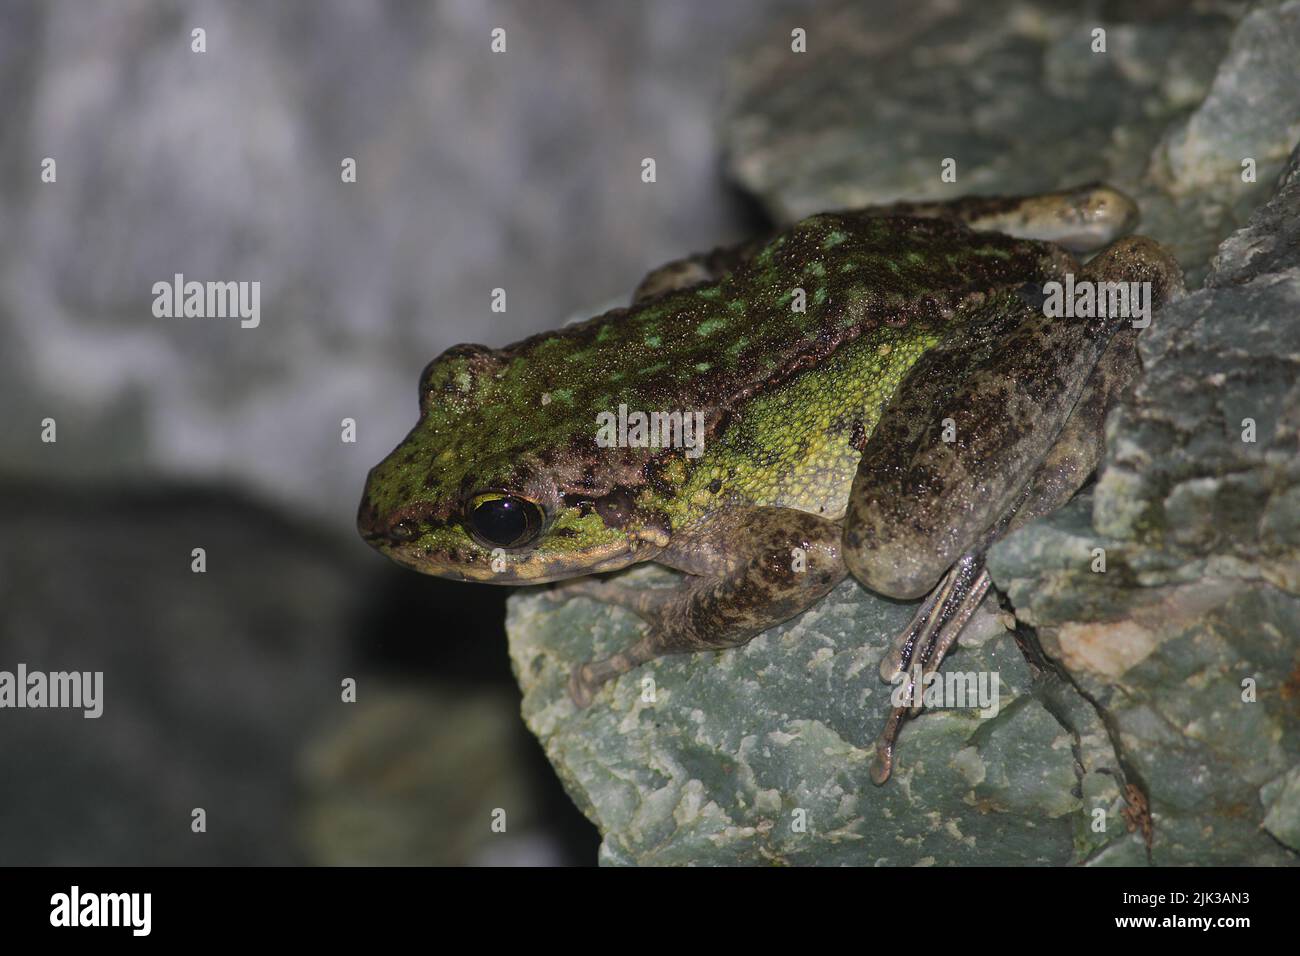 A large and stocky individual of Cascade frog (Amolops sp). Stock Photo